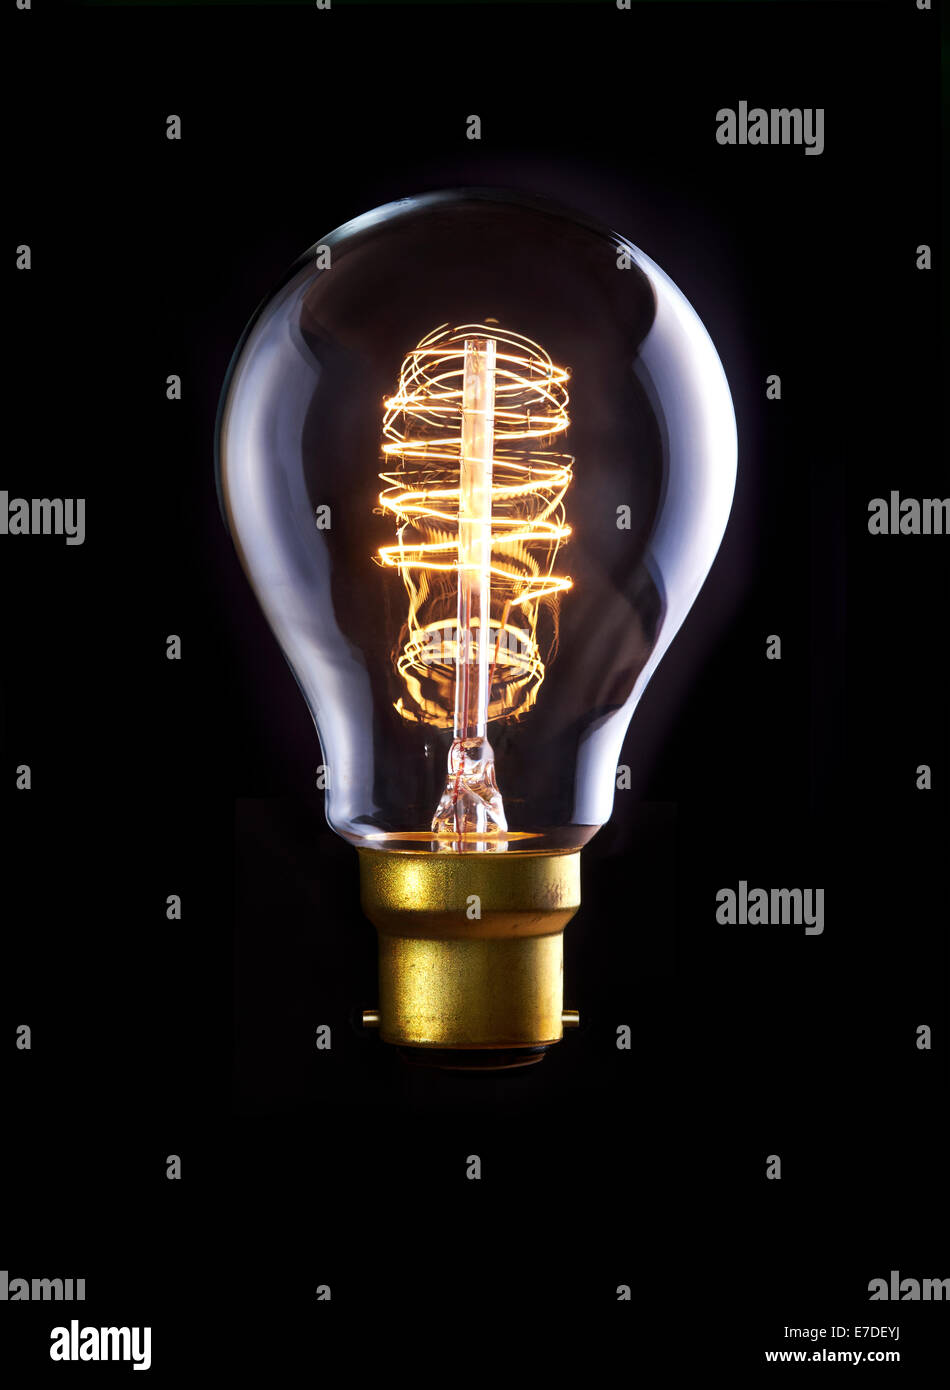 A classic Edison bulb with a loop filament. Switched On. Stock Photo